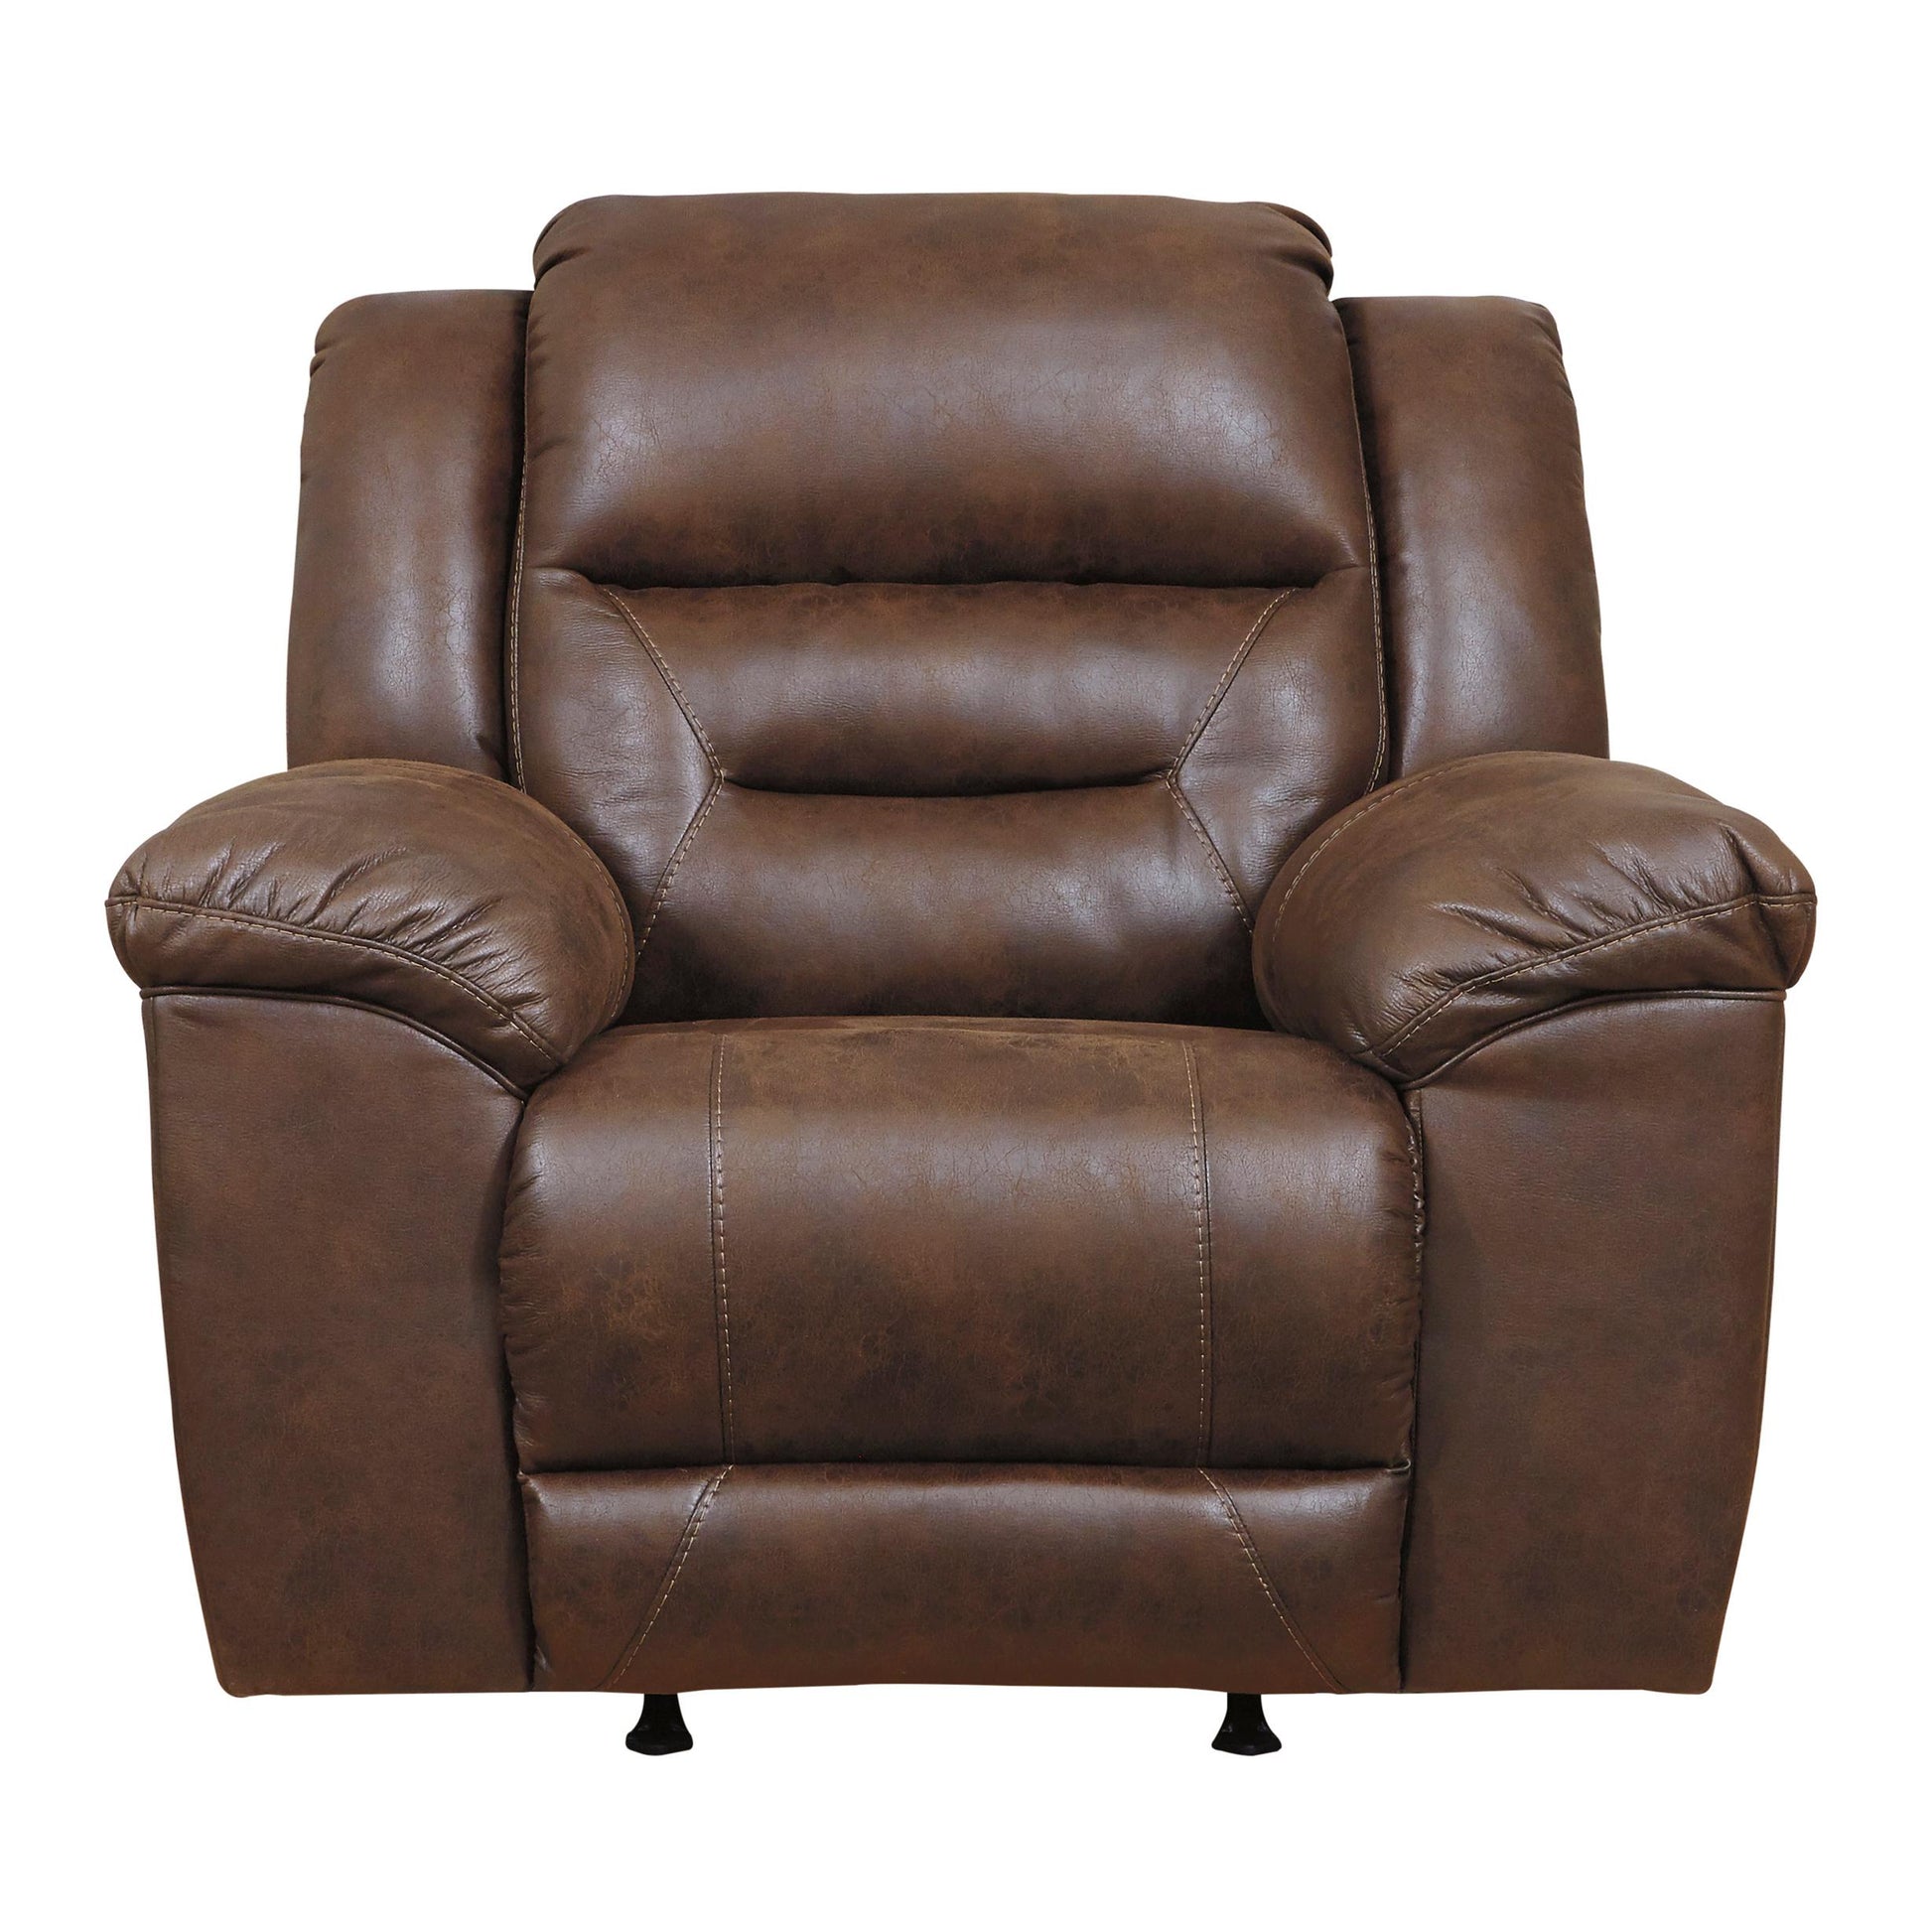 Signature Design by Ashley Stoneland Power Rocker Leather Look Recliner 3990498 IMAGE 1